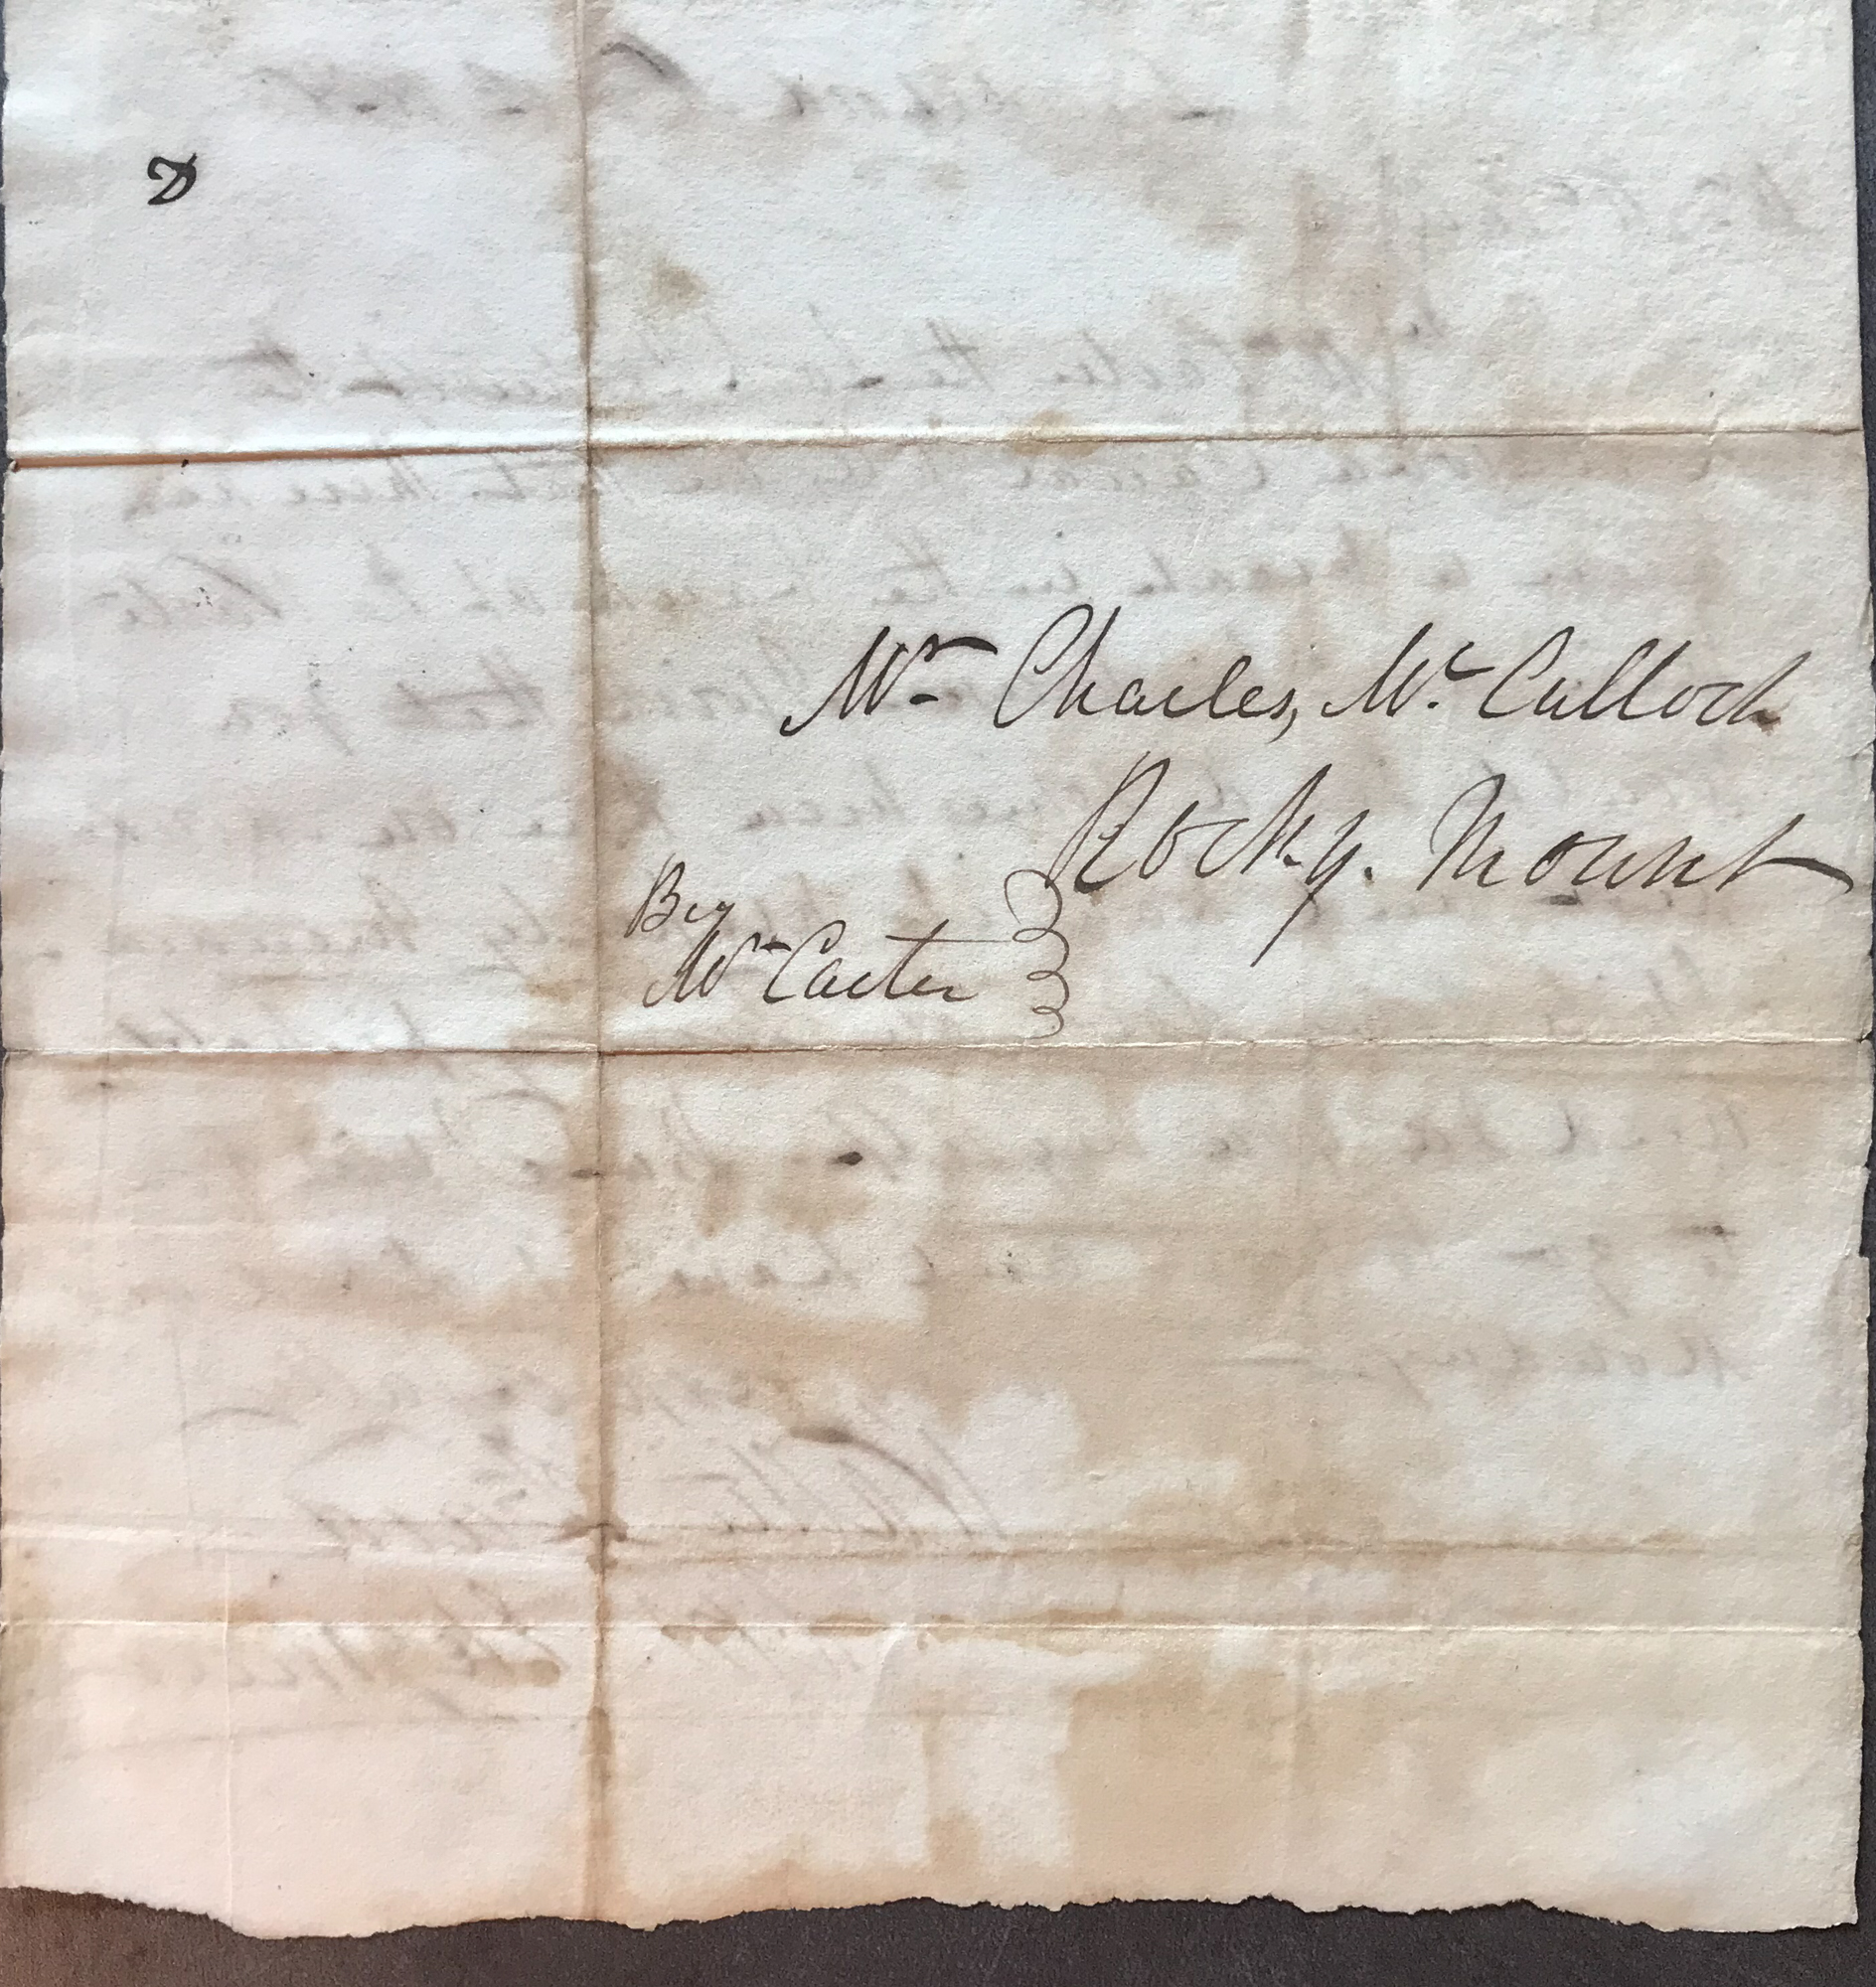 WM. CARTER'S REQUEST FOR REPAIRS @ FISHING CREEK CANAL - 1828, p. 2